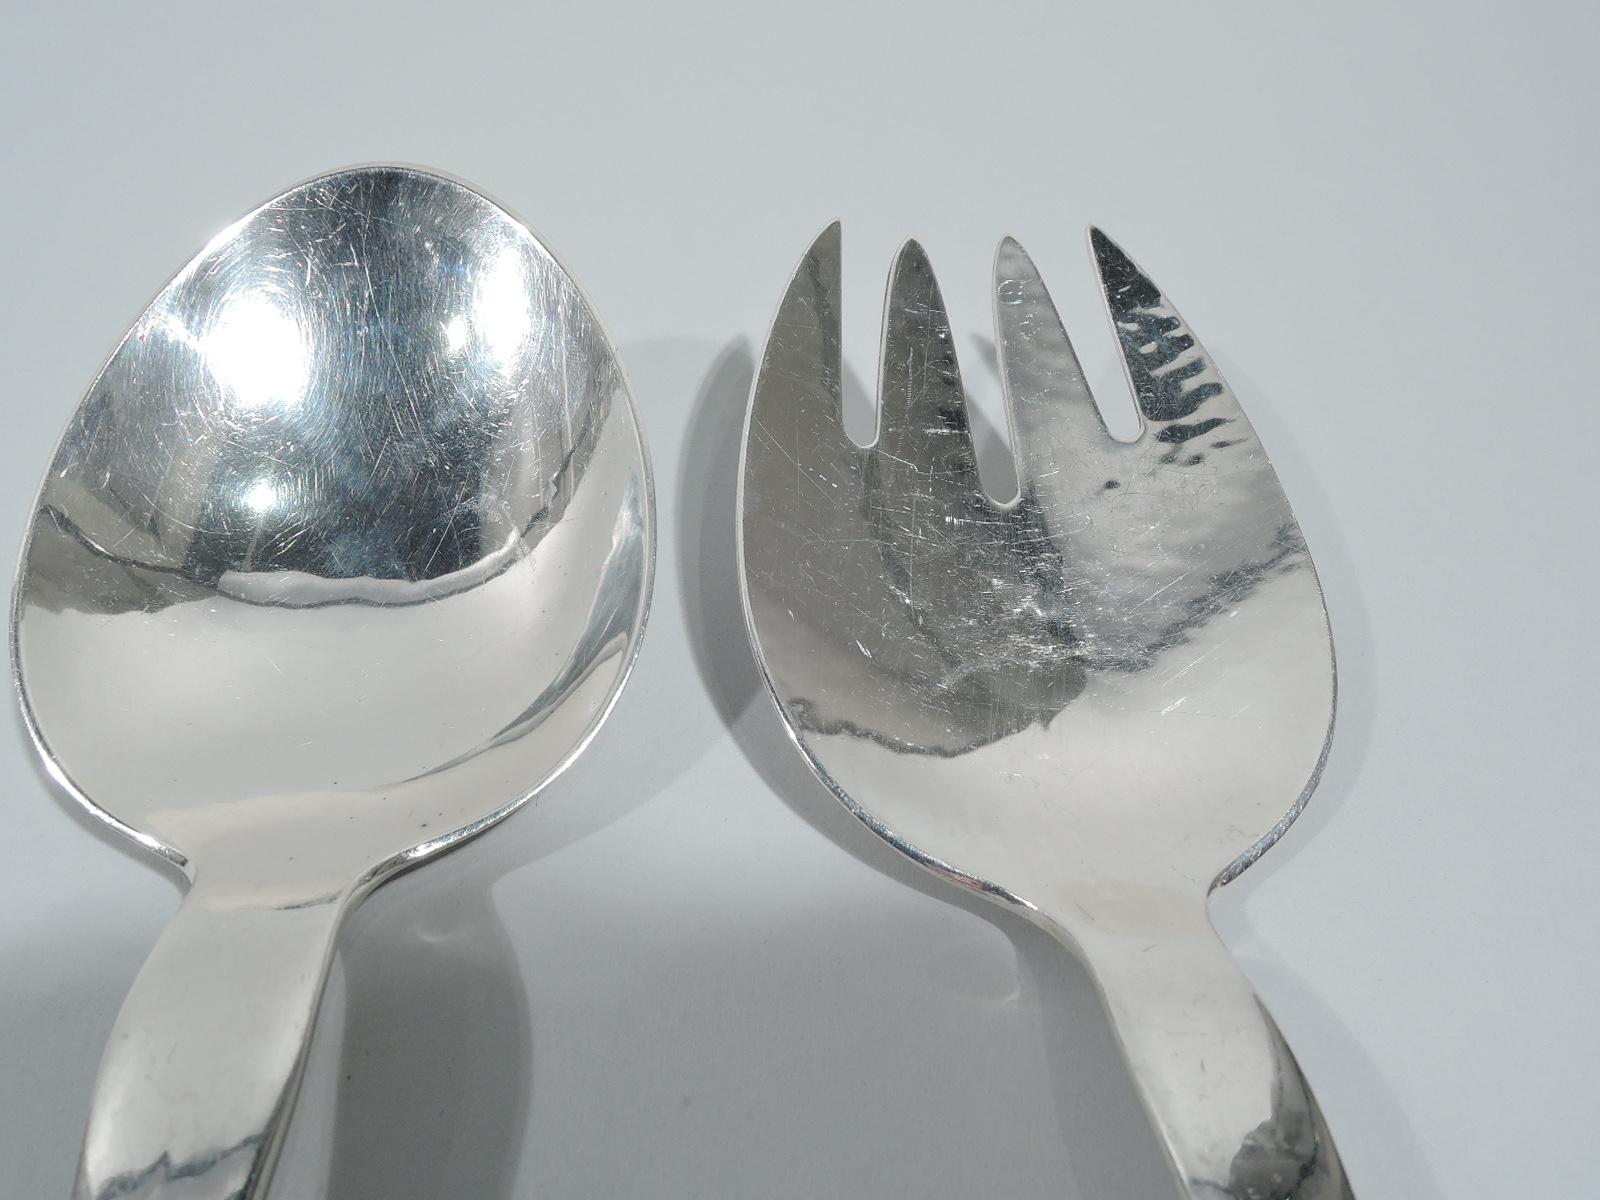 Pair of early sterling silver salad servers. Made by Georg Jensen in Copenhagen. This pair comprises spoon with wide oval bowl and fork with wide and curved 4-tined shank. Each has open knotwork-style scrolled terminal in form of leafing branch. A